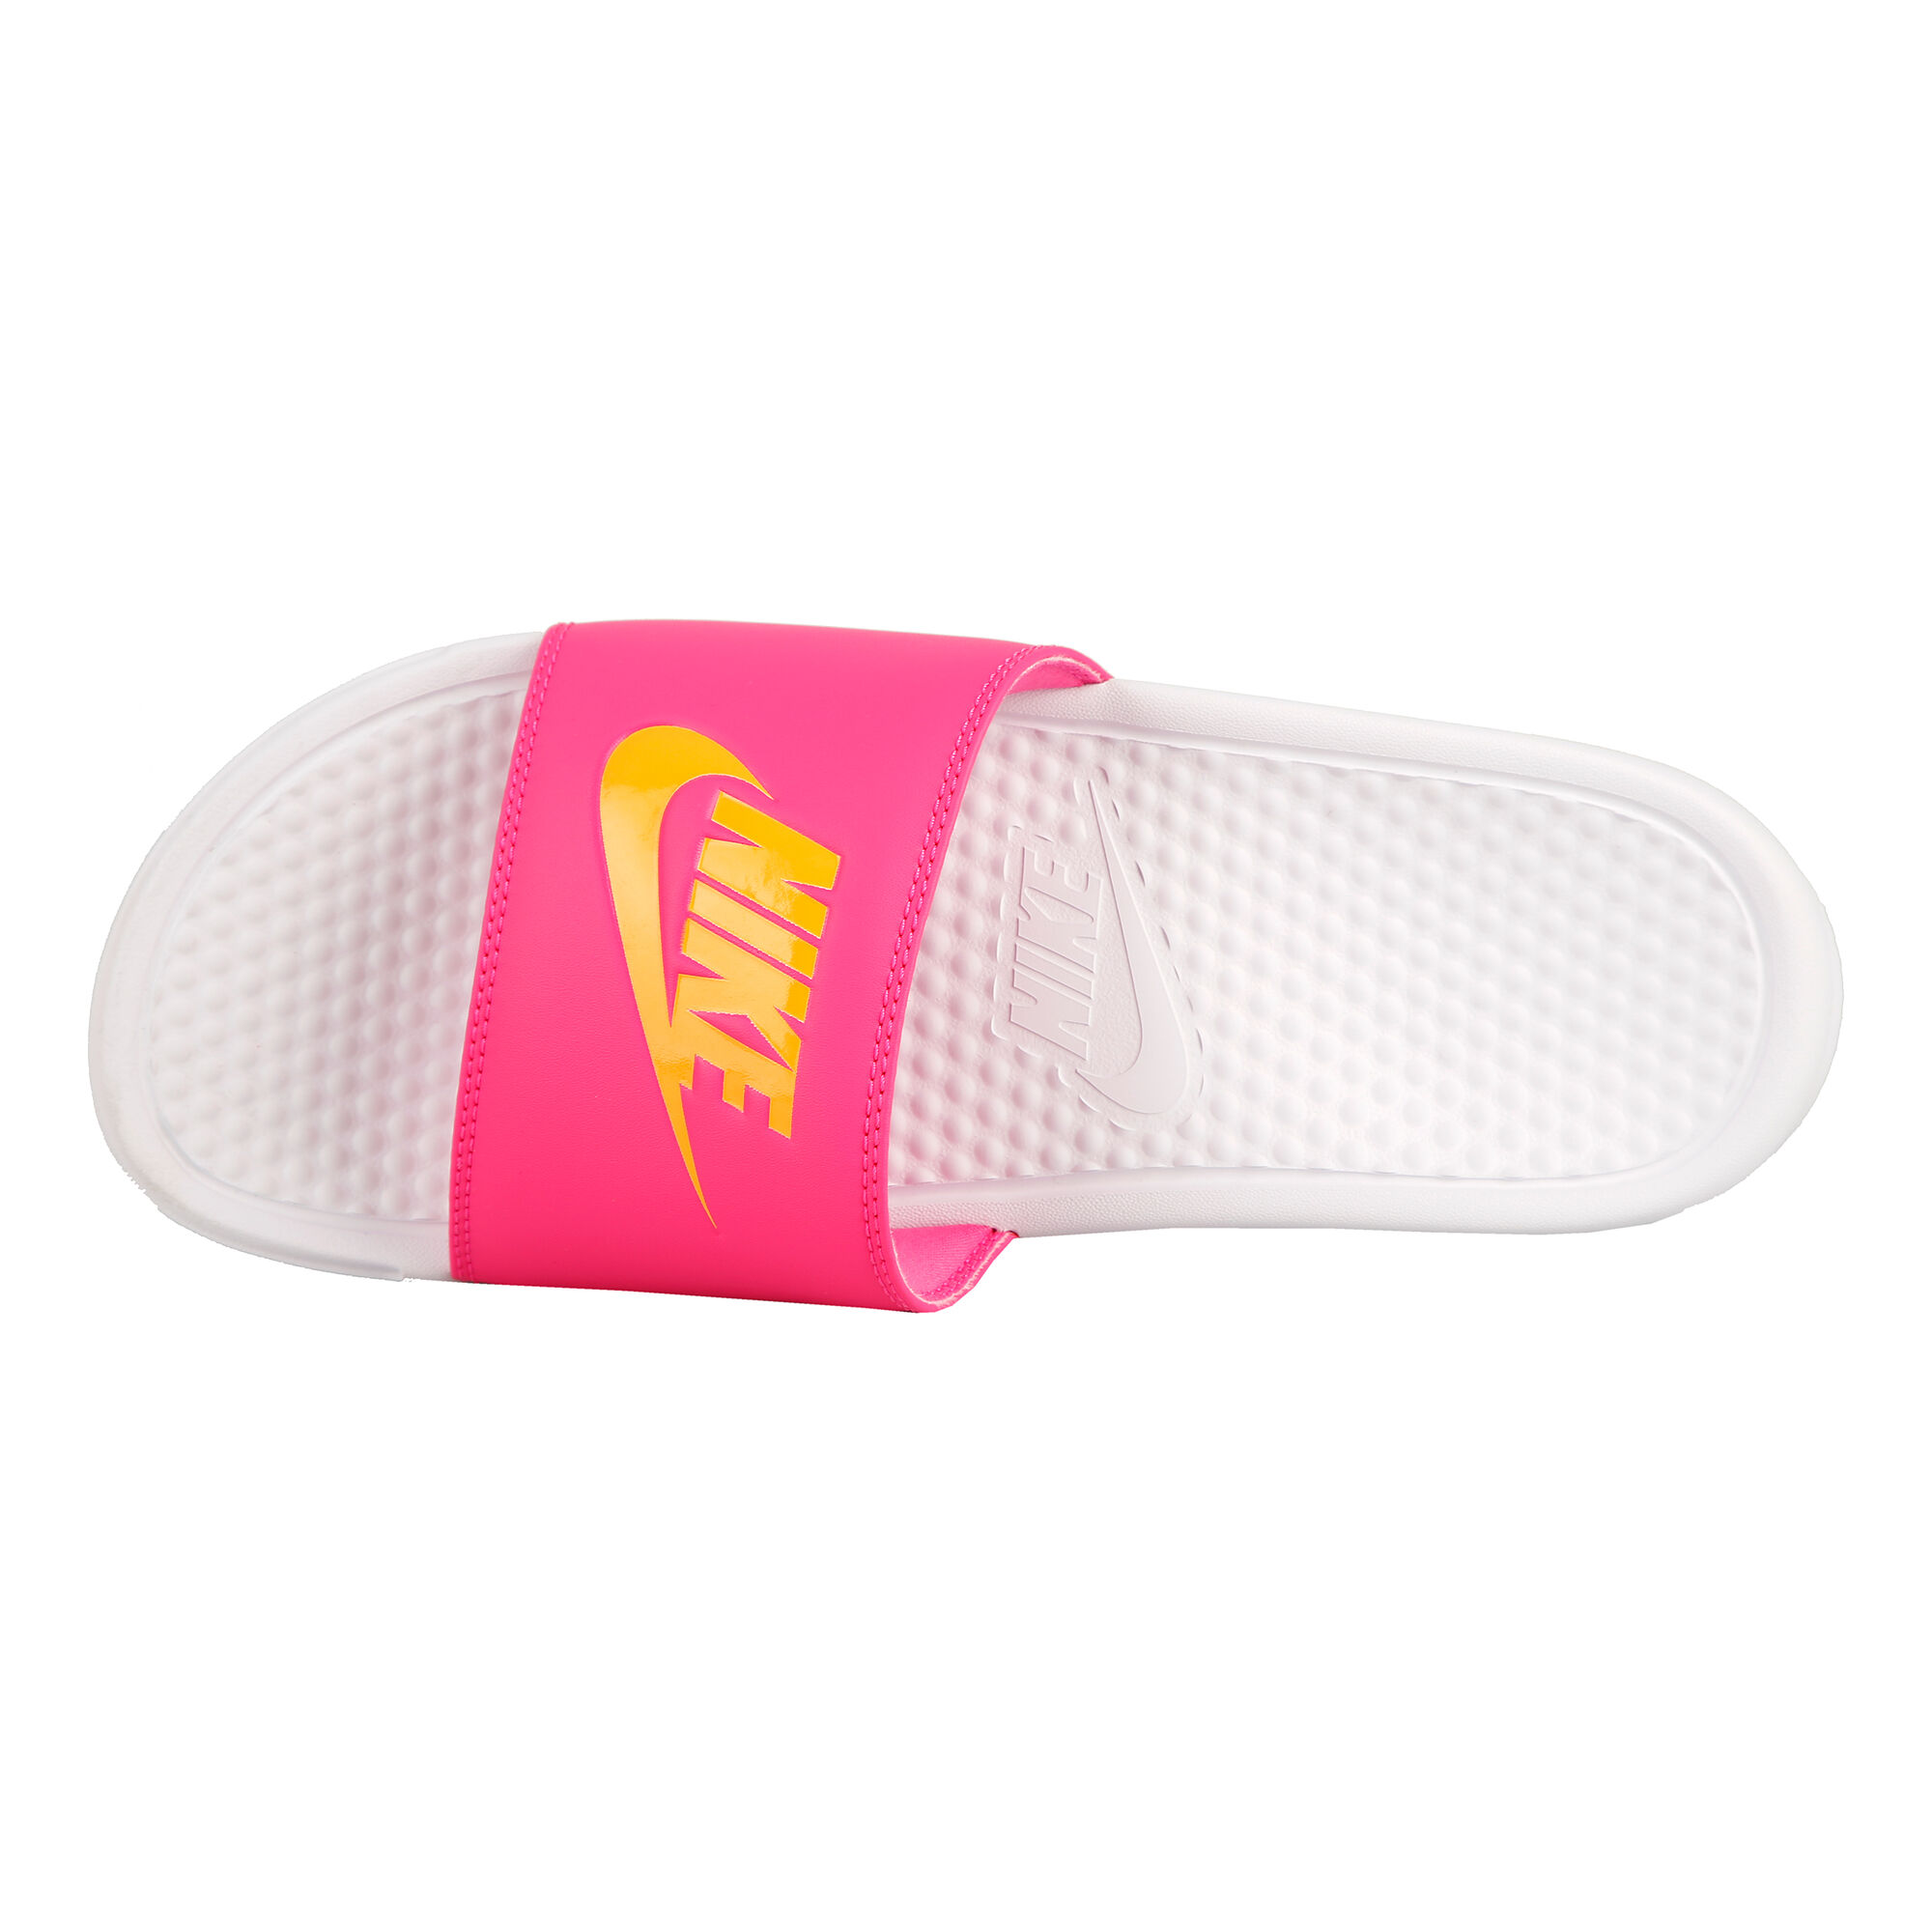 Nike Just Do It Chanclas Mujeres - Rosa online |